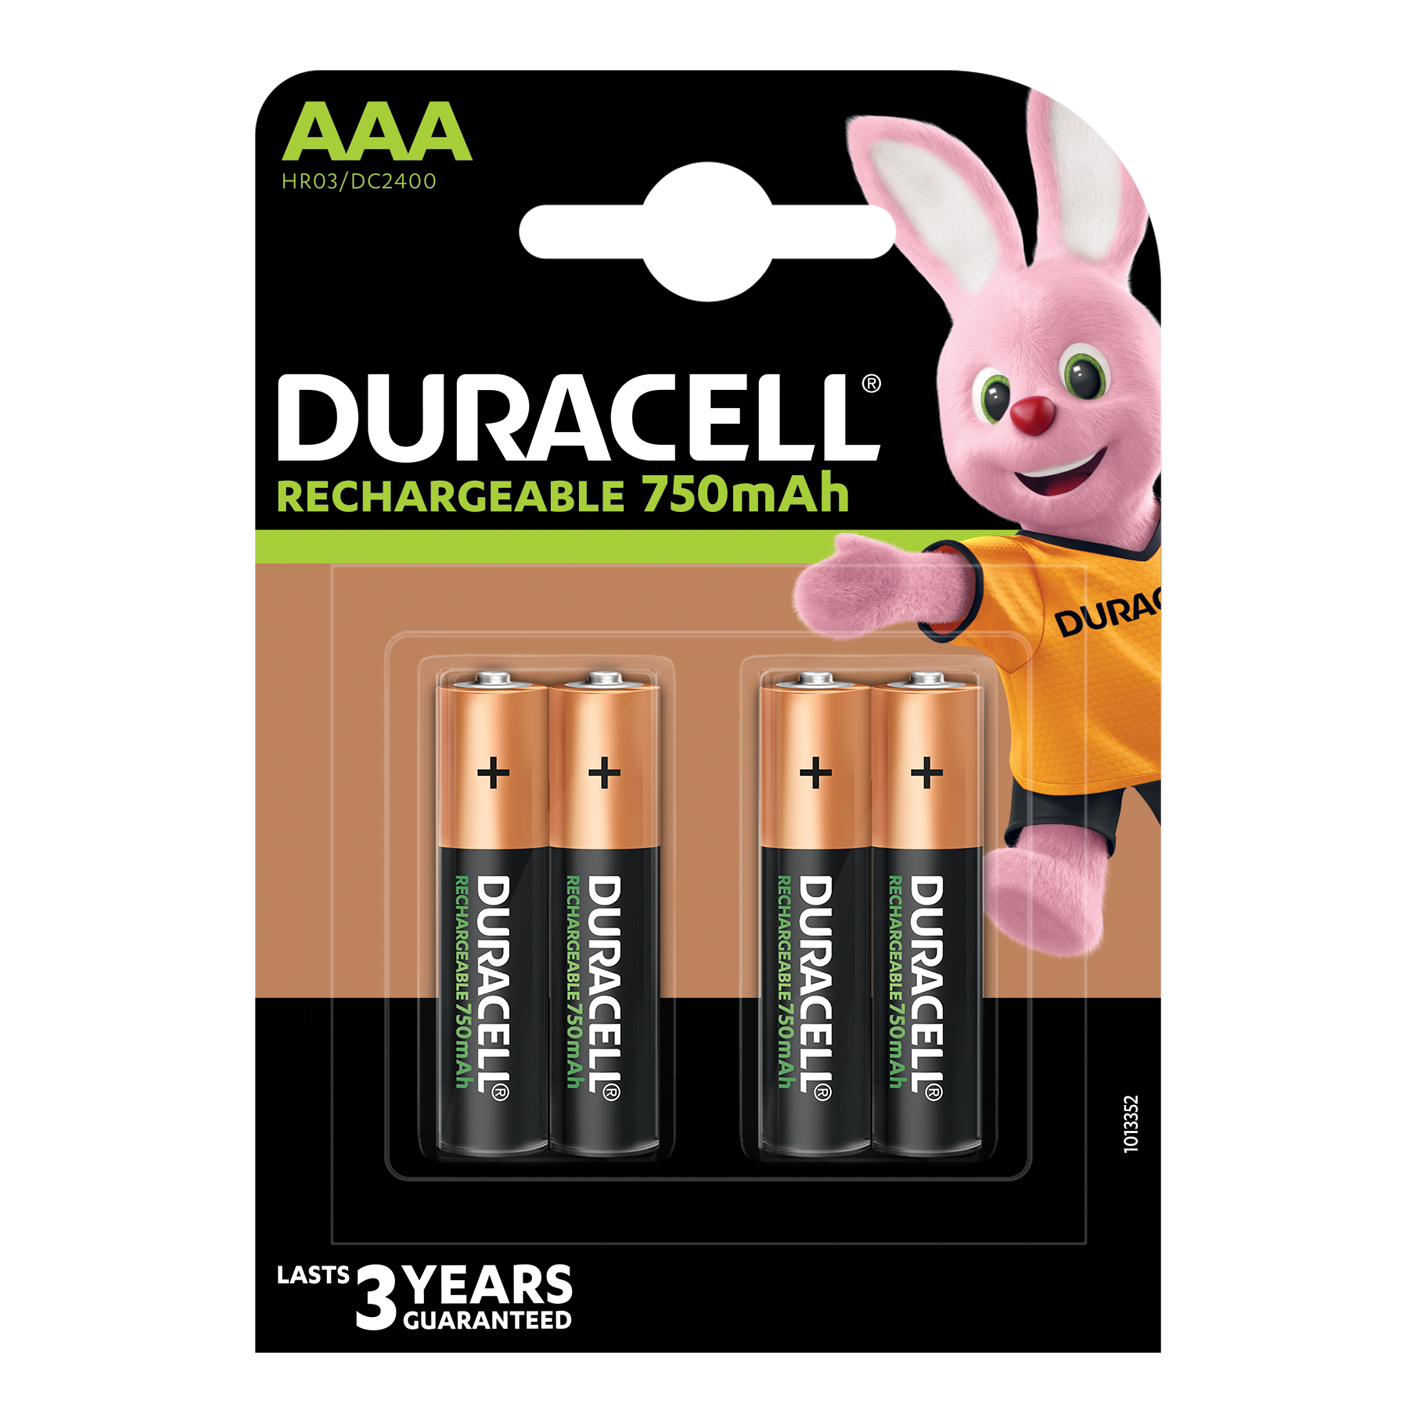 Duracell AAA 750mAh Recharge, Pack of 4